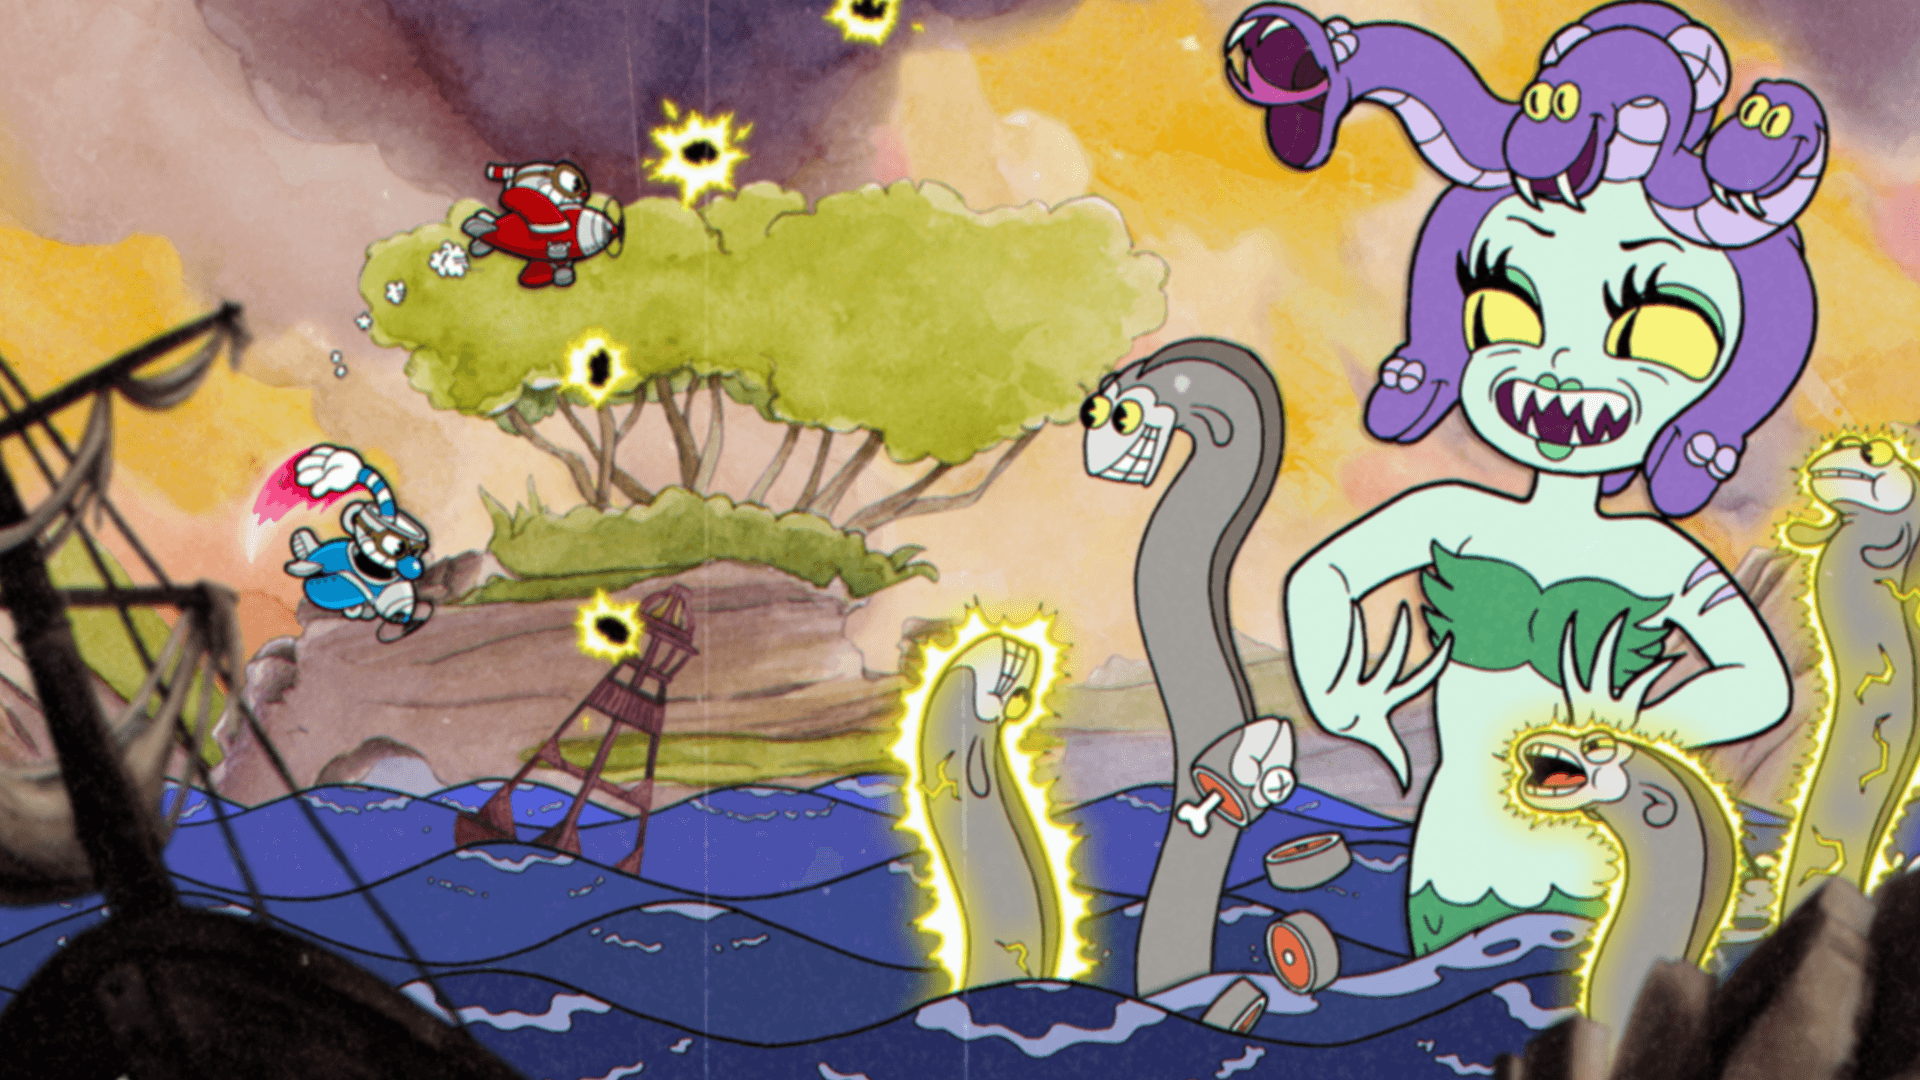 Challenging and Fun, Cuphead